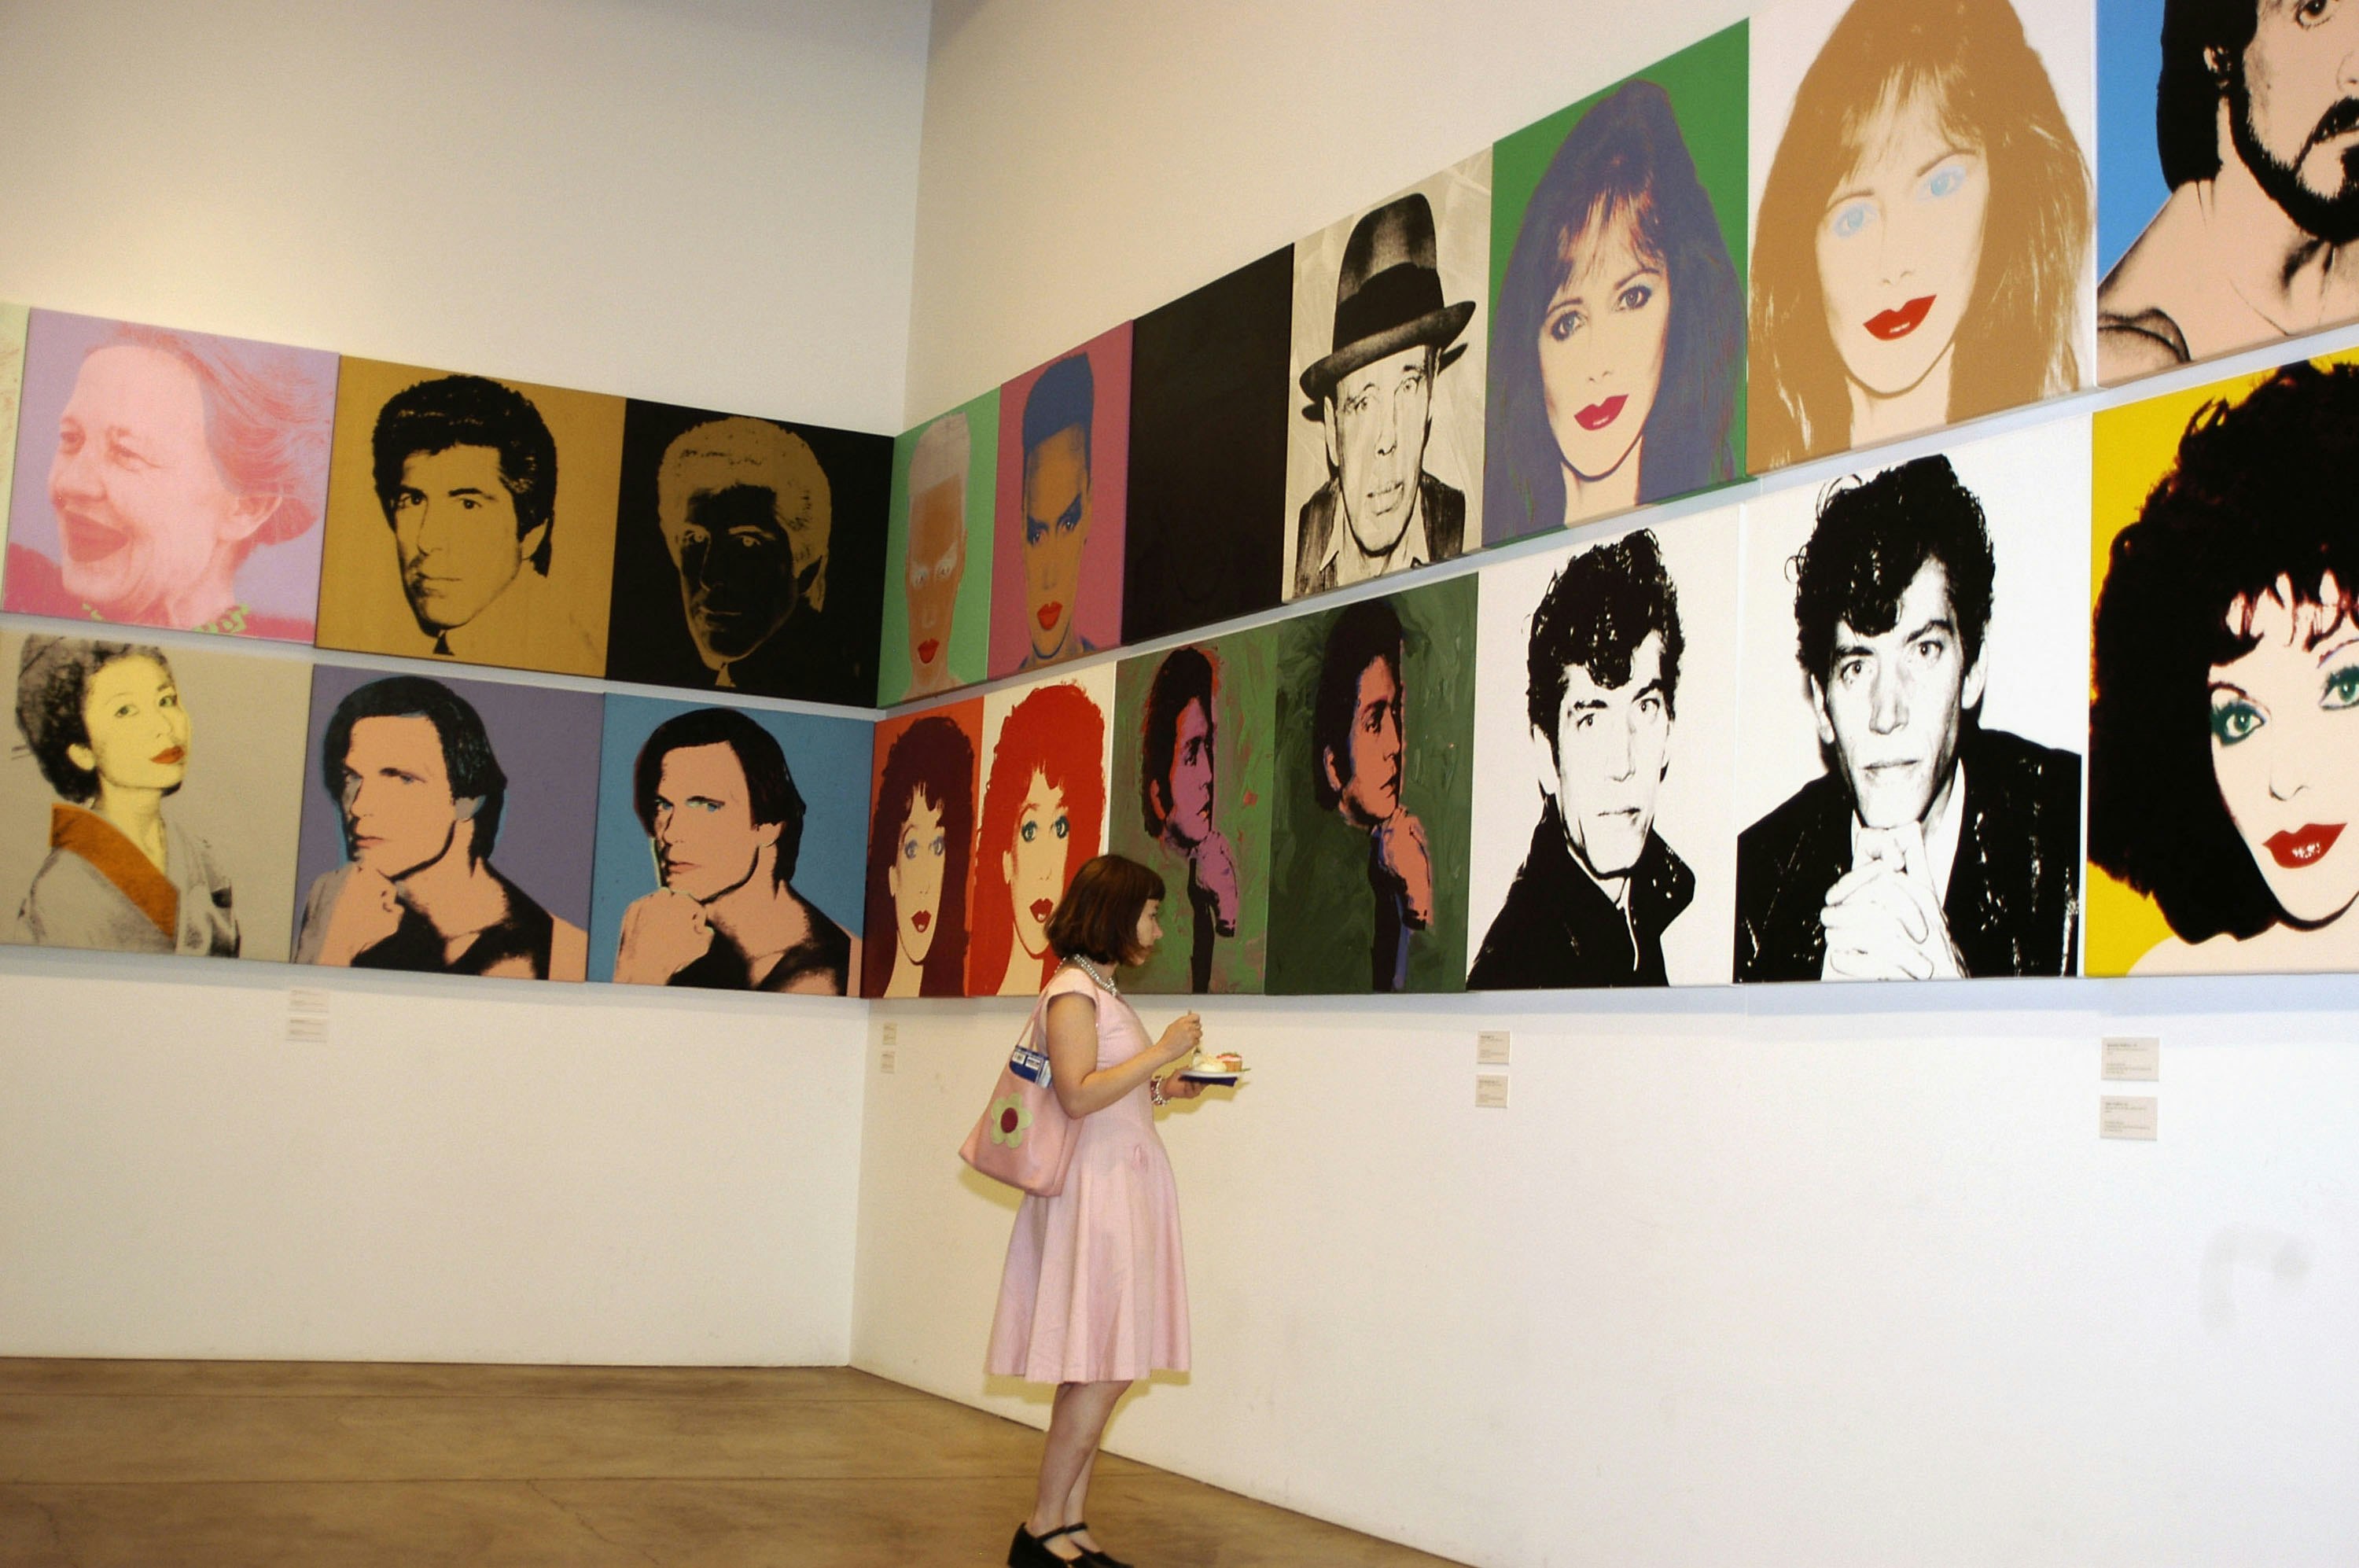 PITTSBURGH, PENNSYLVANIA - AUGUST 6:  Christine "Darling" Feldman enjoys birthday cake as well as the artwork of Andy Warhol during the 75th birthday celebrations at the Andy Warhol museum on August 6, 2003 Pittsburgh, Pennsylvania. Activities were on hand along with cake and ice cream as part of the Summer of Andy.   (Photo by Archie Carpenter/Getty Images)